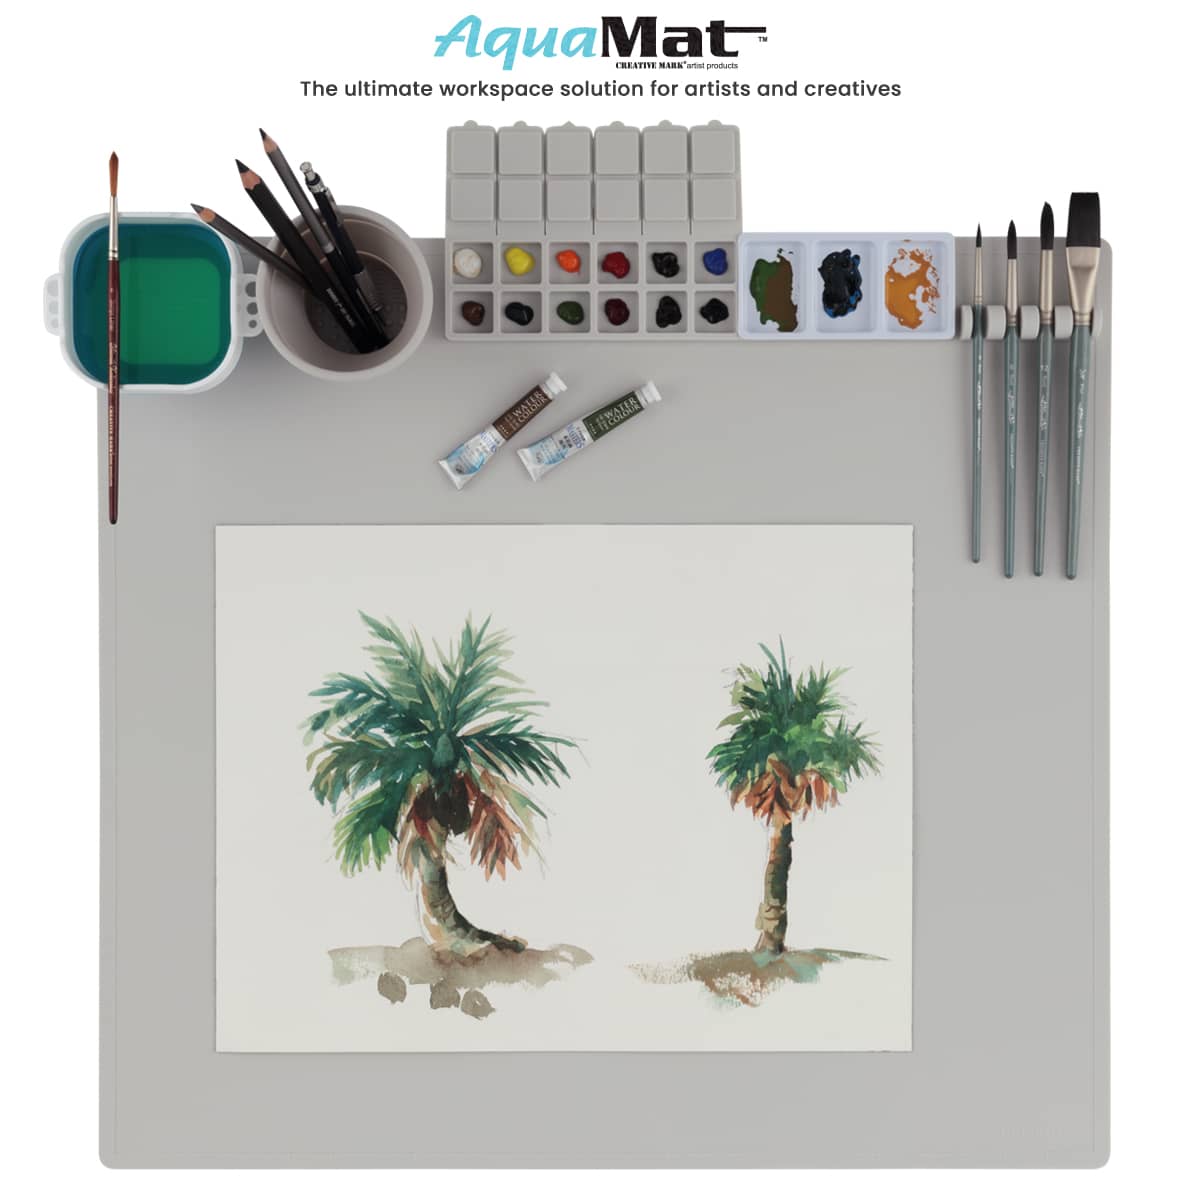 7 Innovative Art Supplies to Add to Your Studio Collection